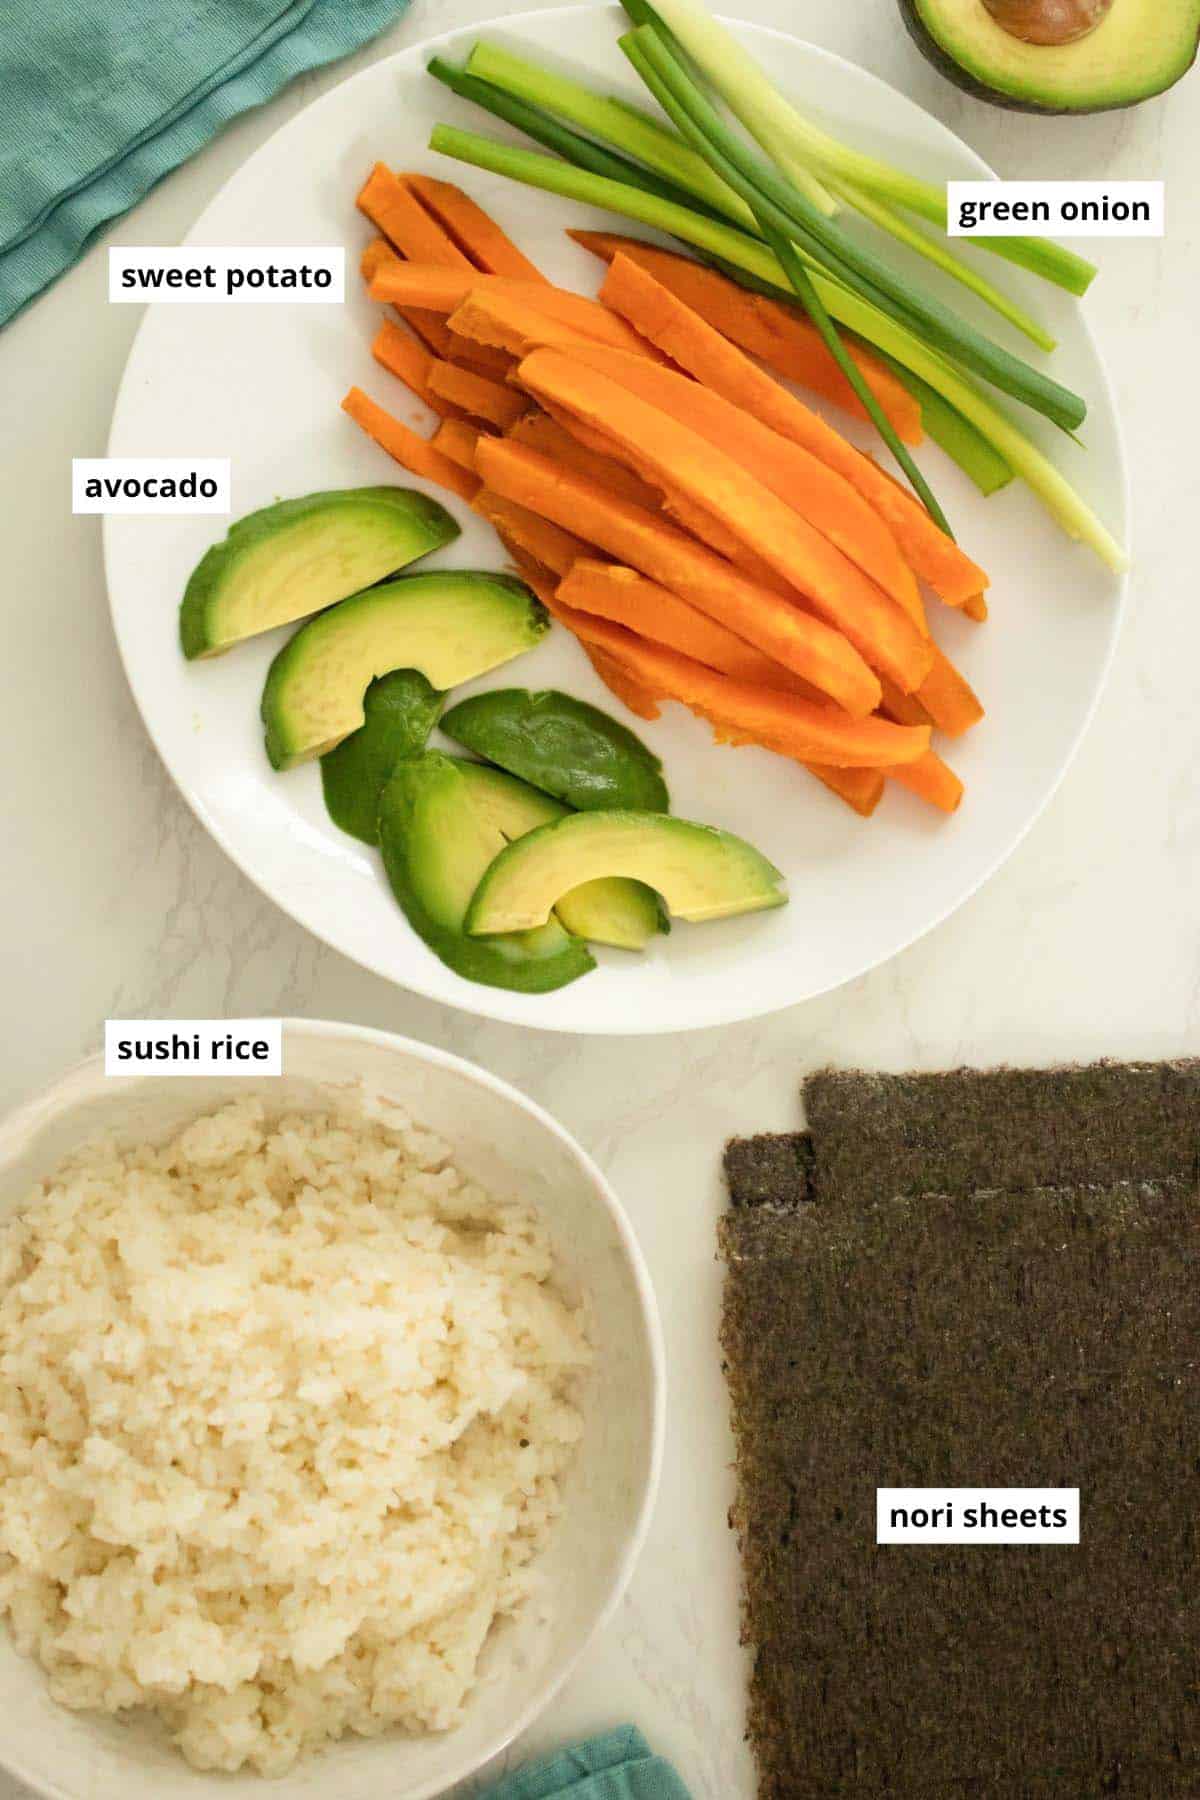 sweet potato, avocado, green onion, cooked sushi rice, and sushi nori arranged on a white table with text labels on each ingredient